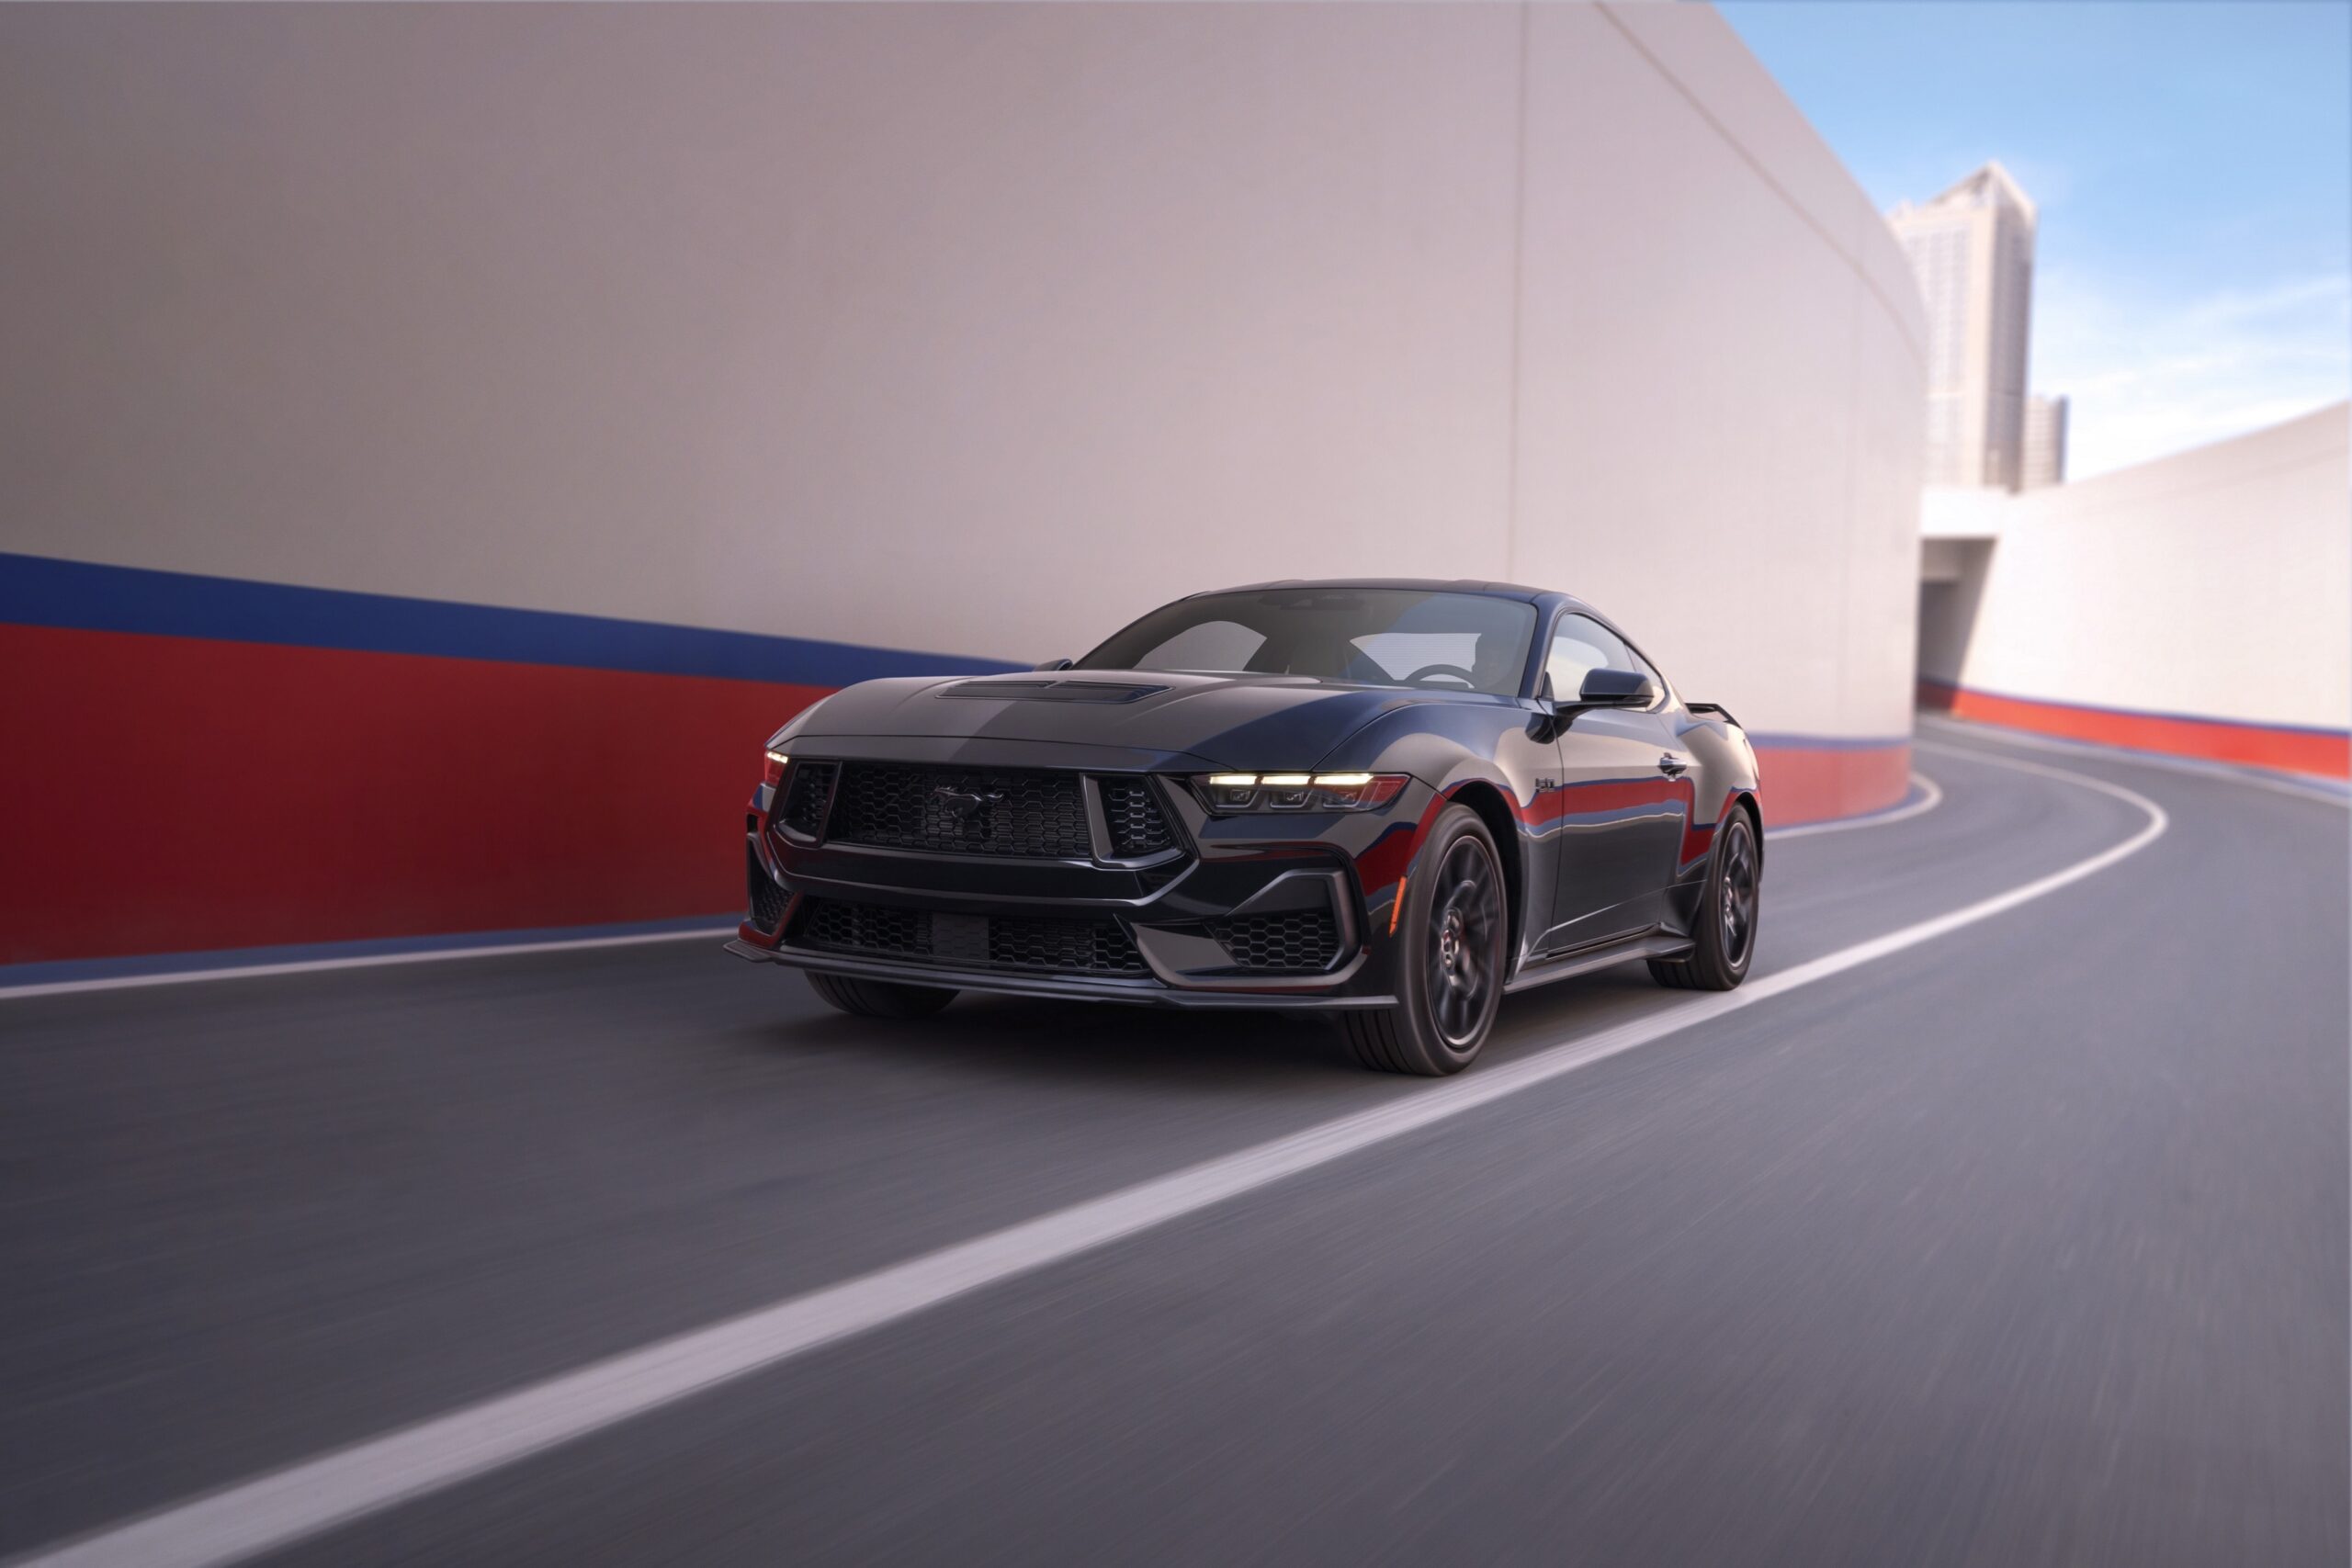 Mustang is America’s Best-Selling Sports Car